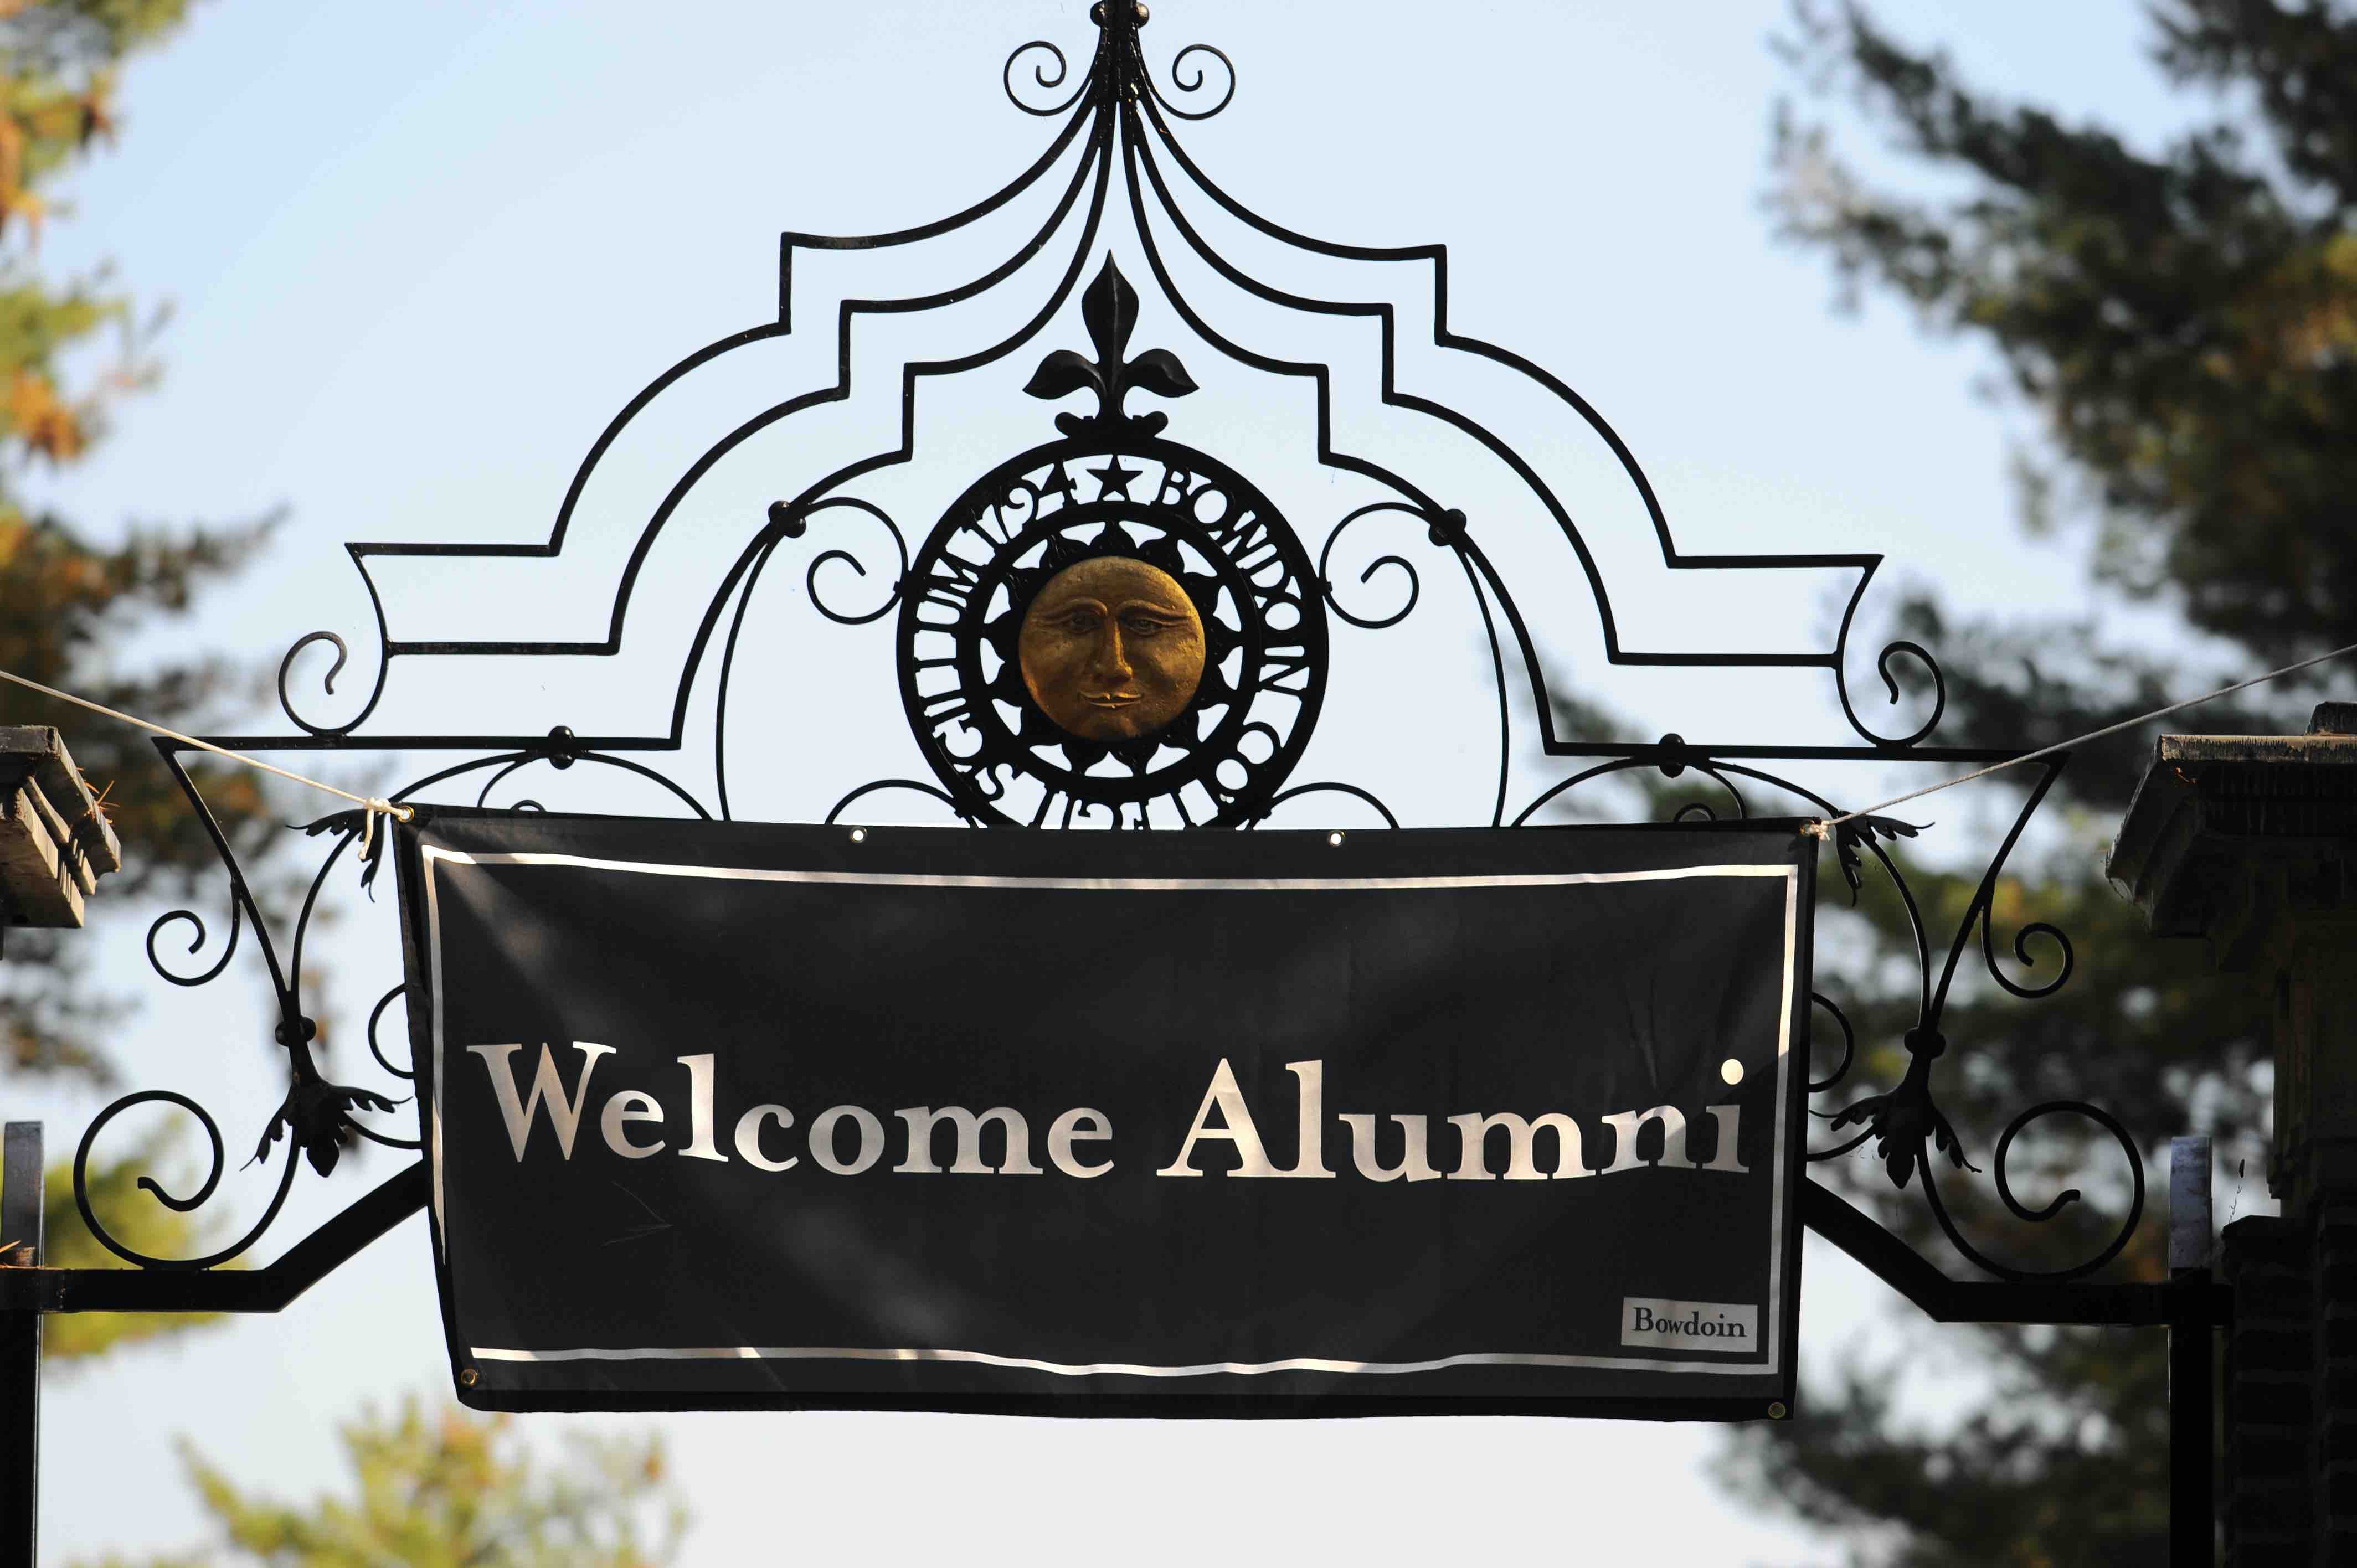 Image of brass gate with sun logo. Sign hangs from gate reading "Welcome Alumni." 